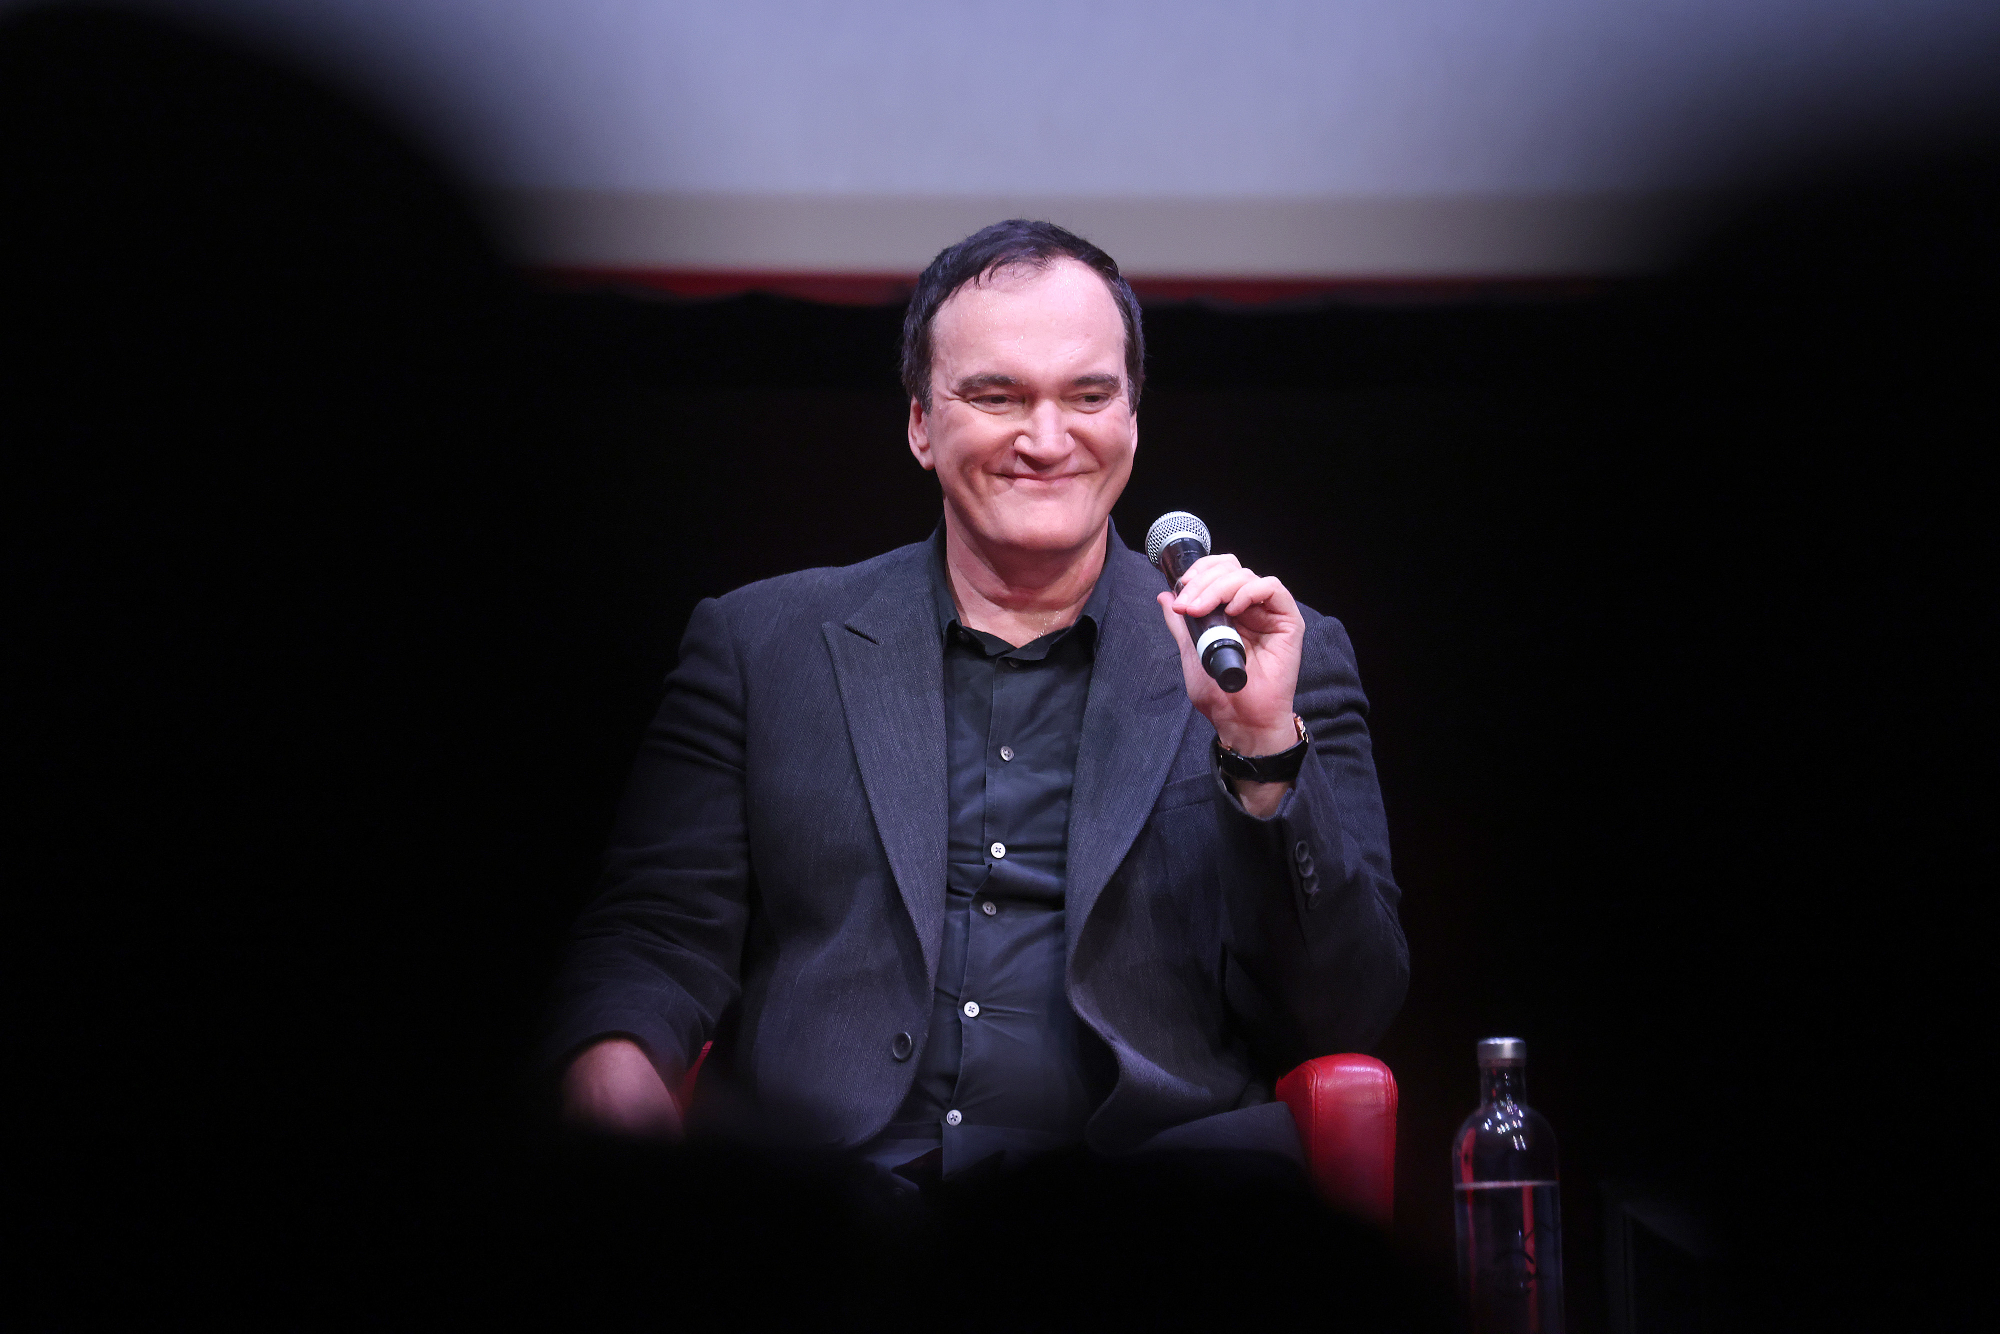 Quentin Tarantino at the Rome Film Festival smiling with a mic in hand